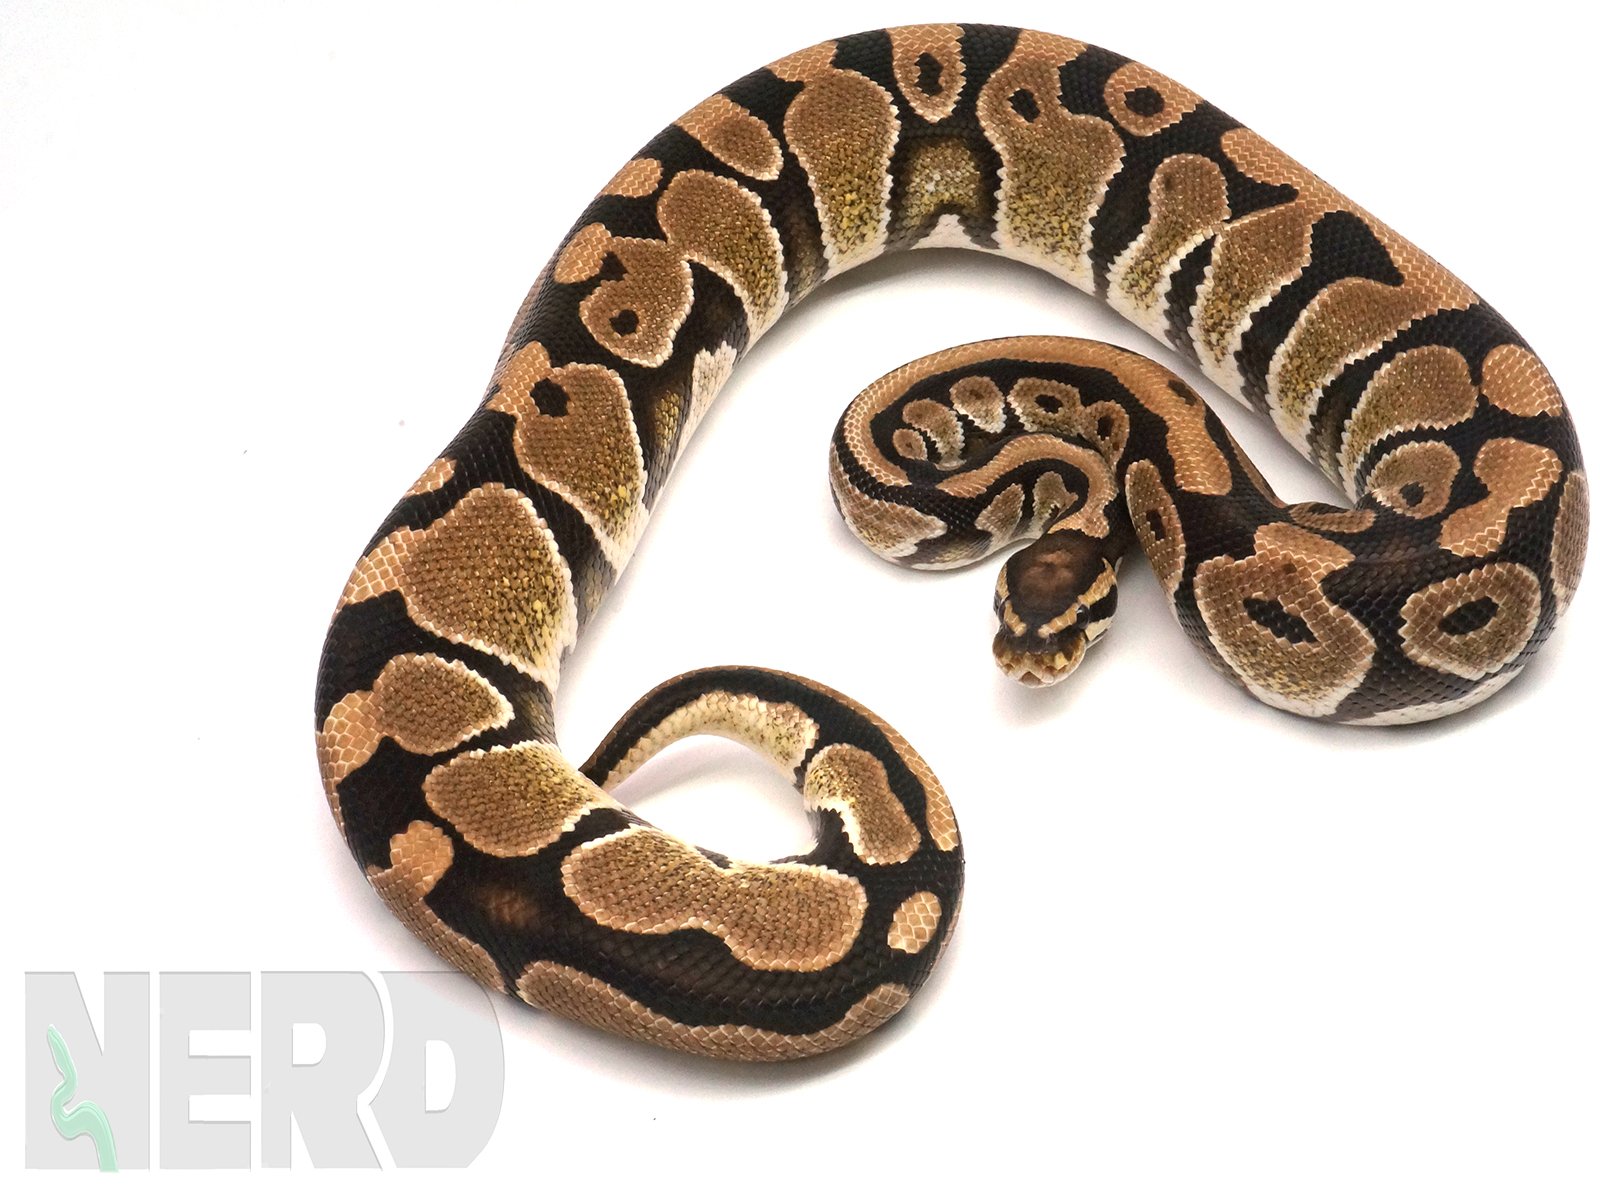 Breeder Cryptic Ball Python by New England Reptile Distributors